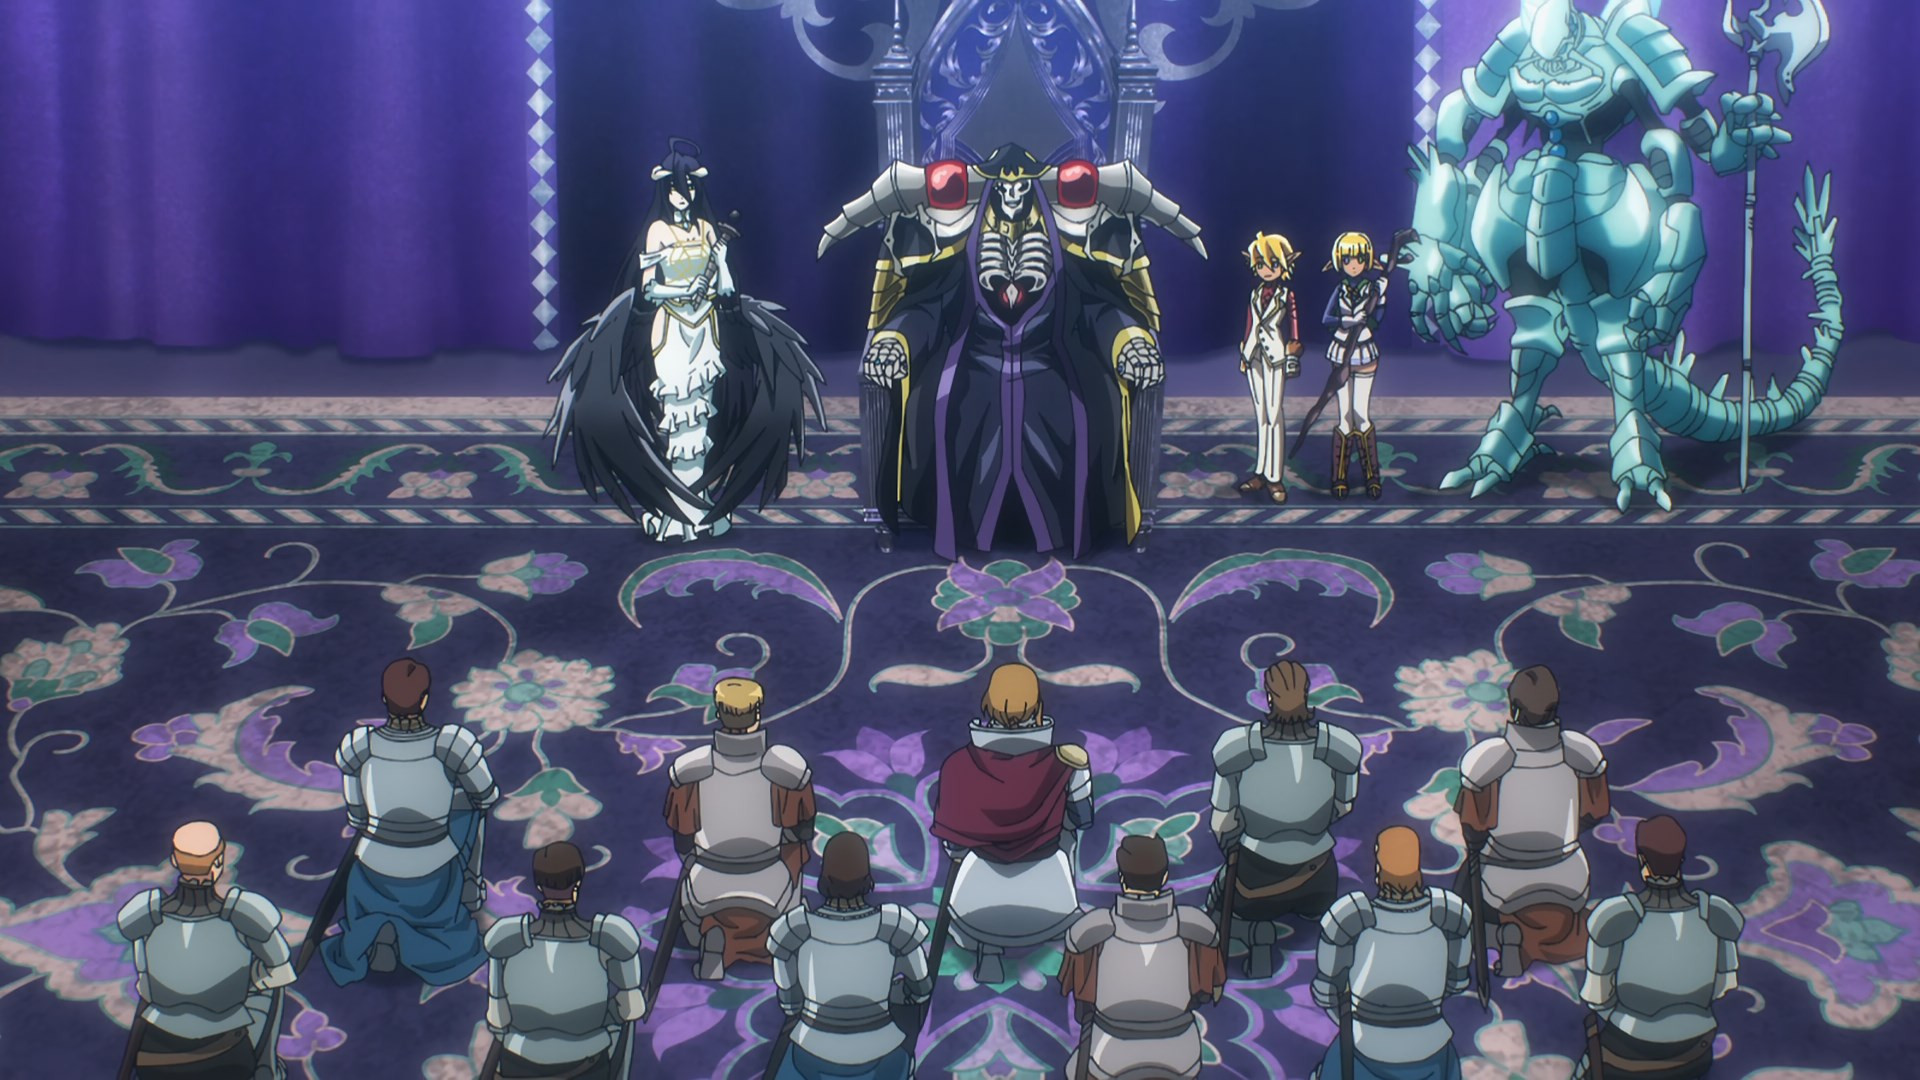 Overlord 4 Episode 10 Release Date and Time for Crunchyroll - GameRevolution